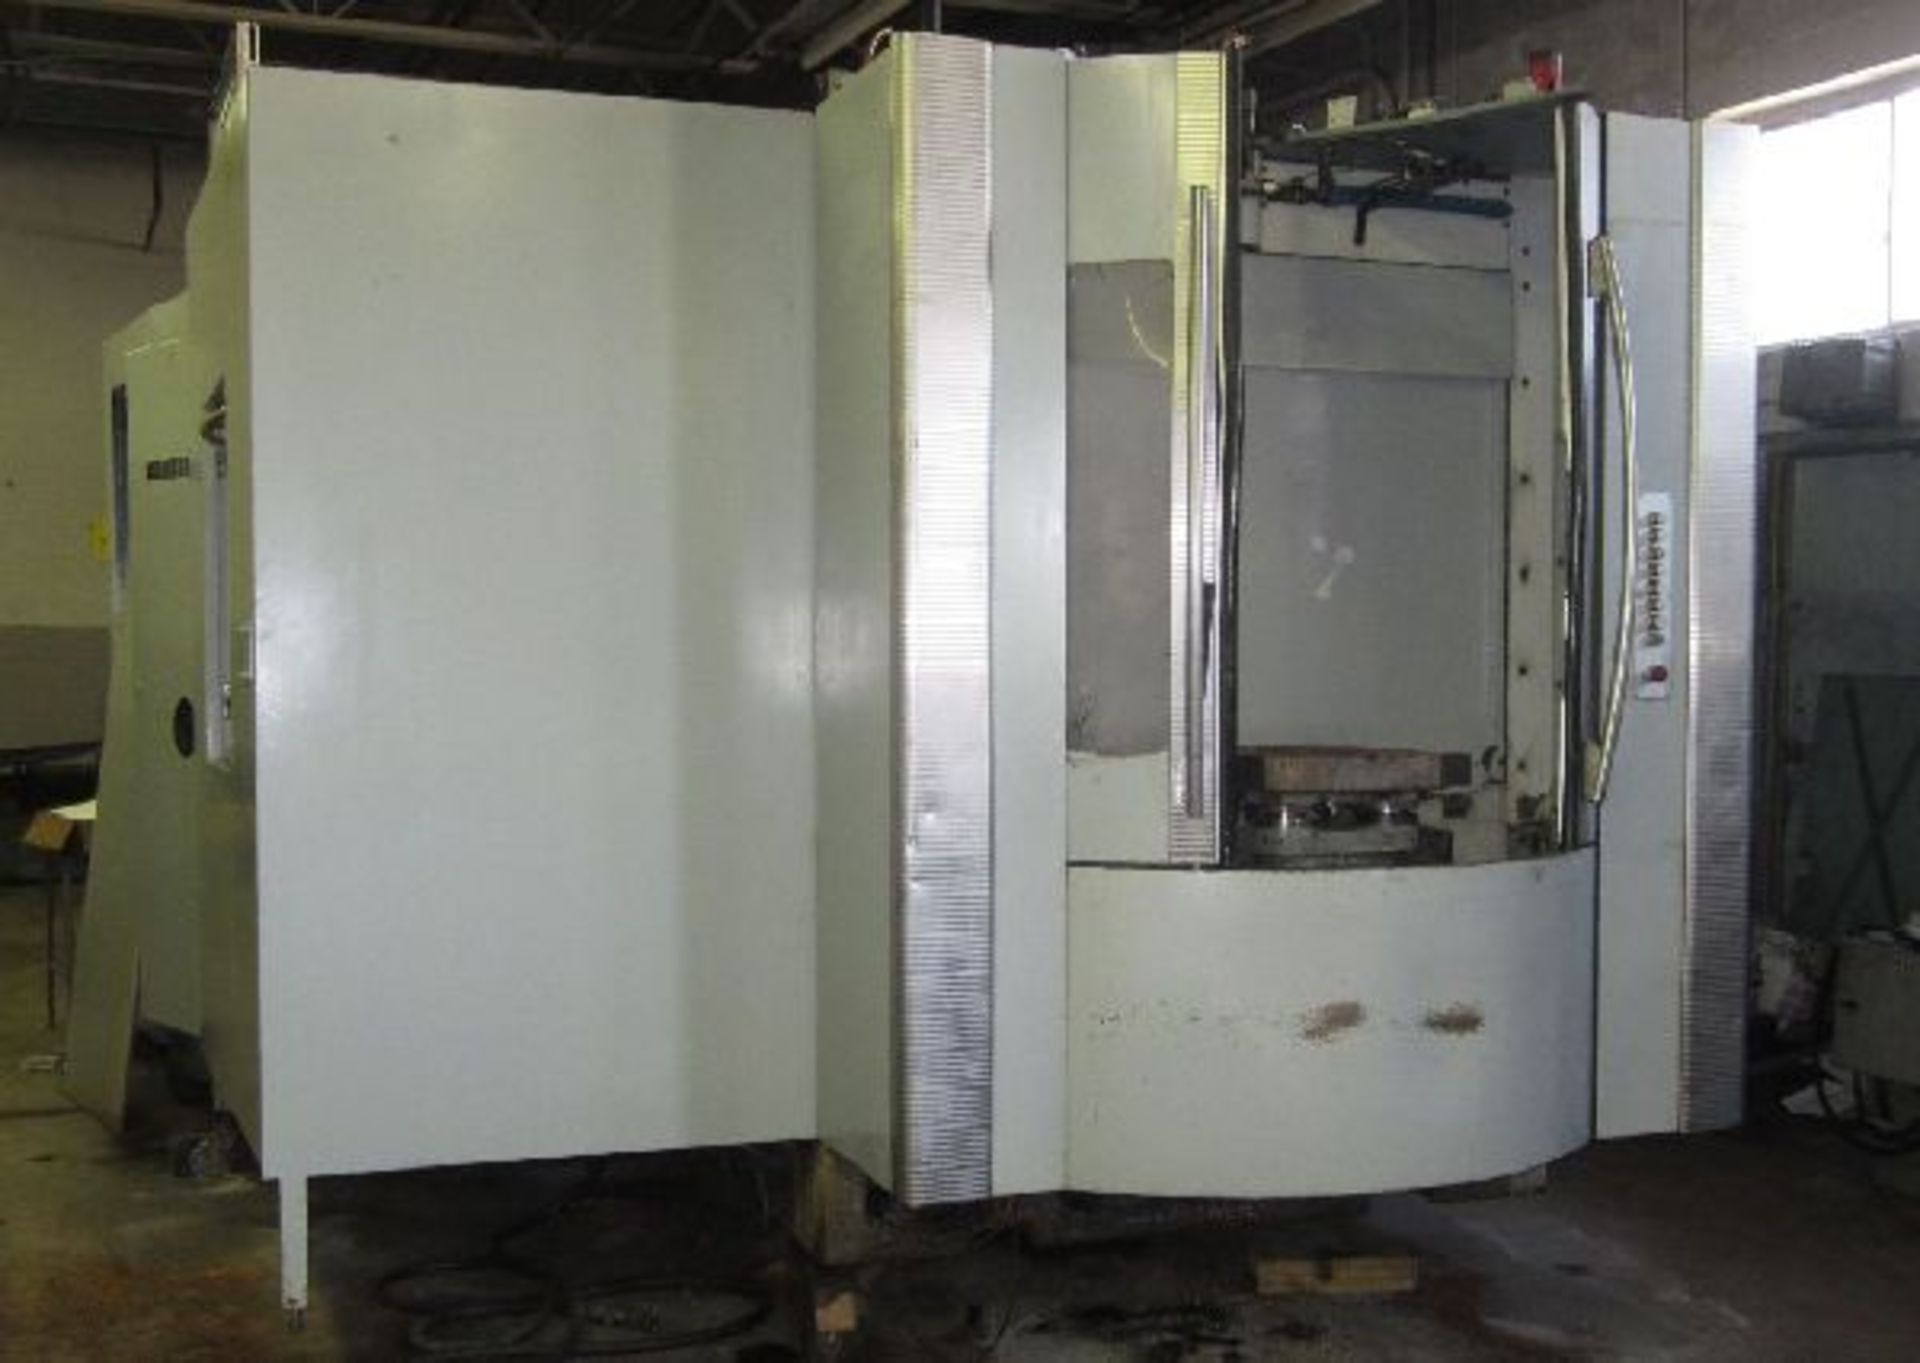 DECKEL-MAHO MODEL DMC--63H DUAL PALLET 4 AXIS HMC, LOCATION AKRON OH, BUYER TO SHIP, LOADING FEE 800 - Image 3 of 3